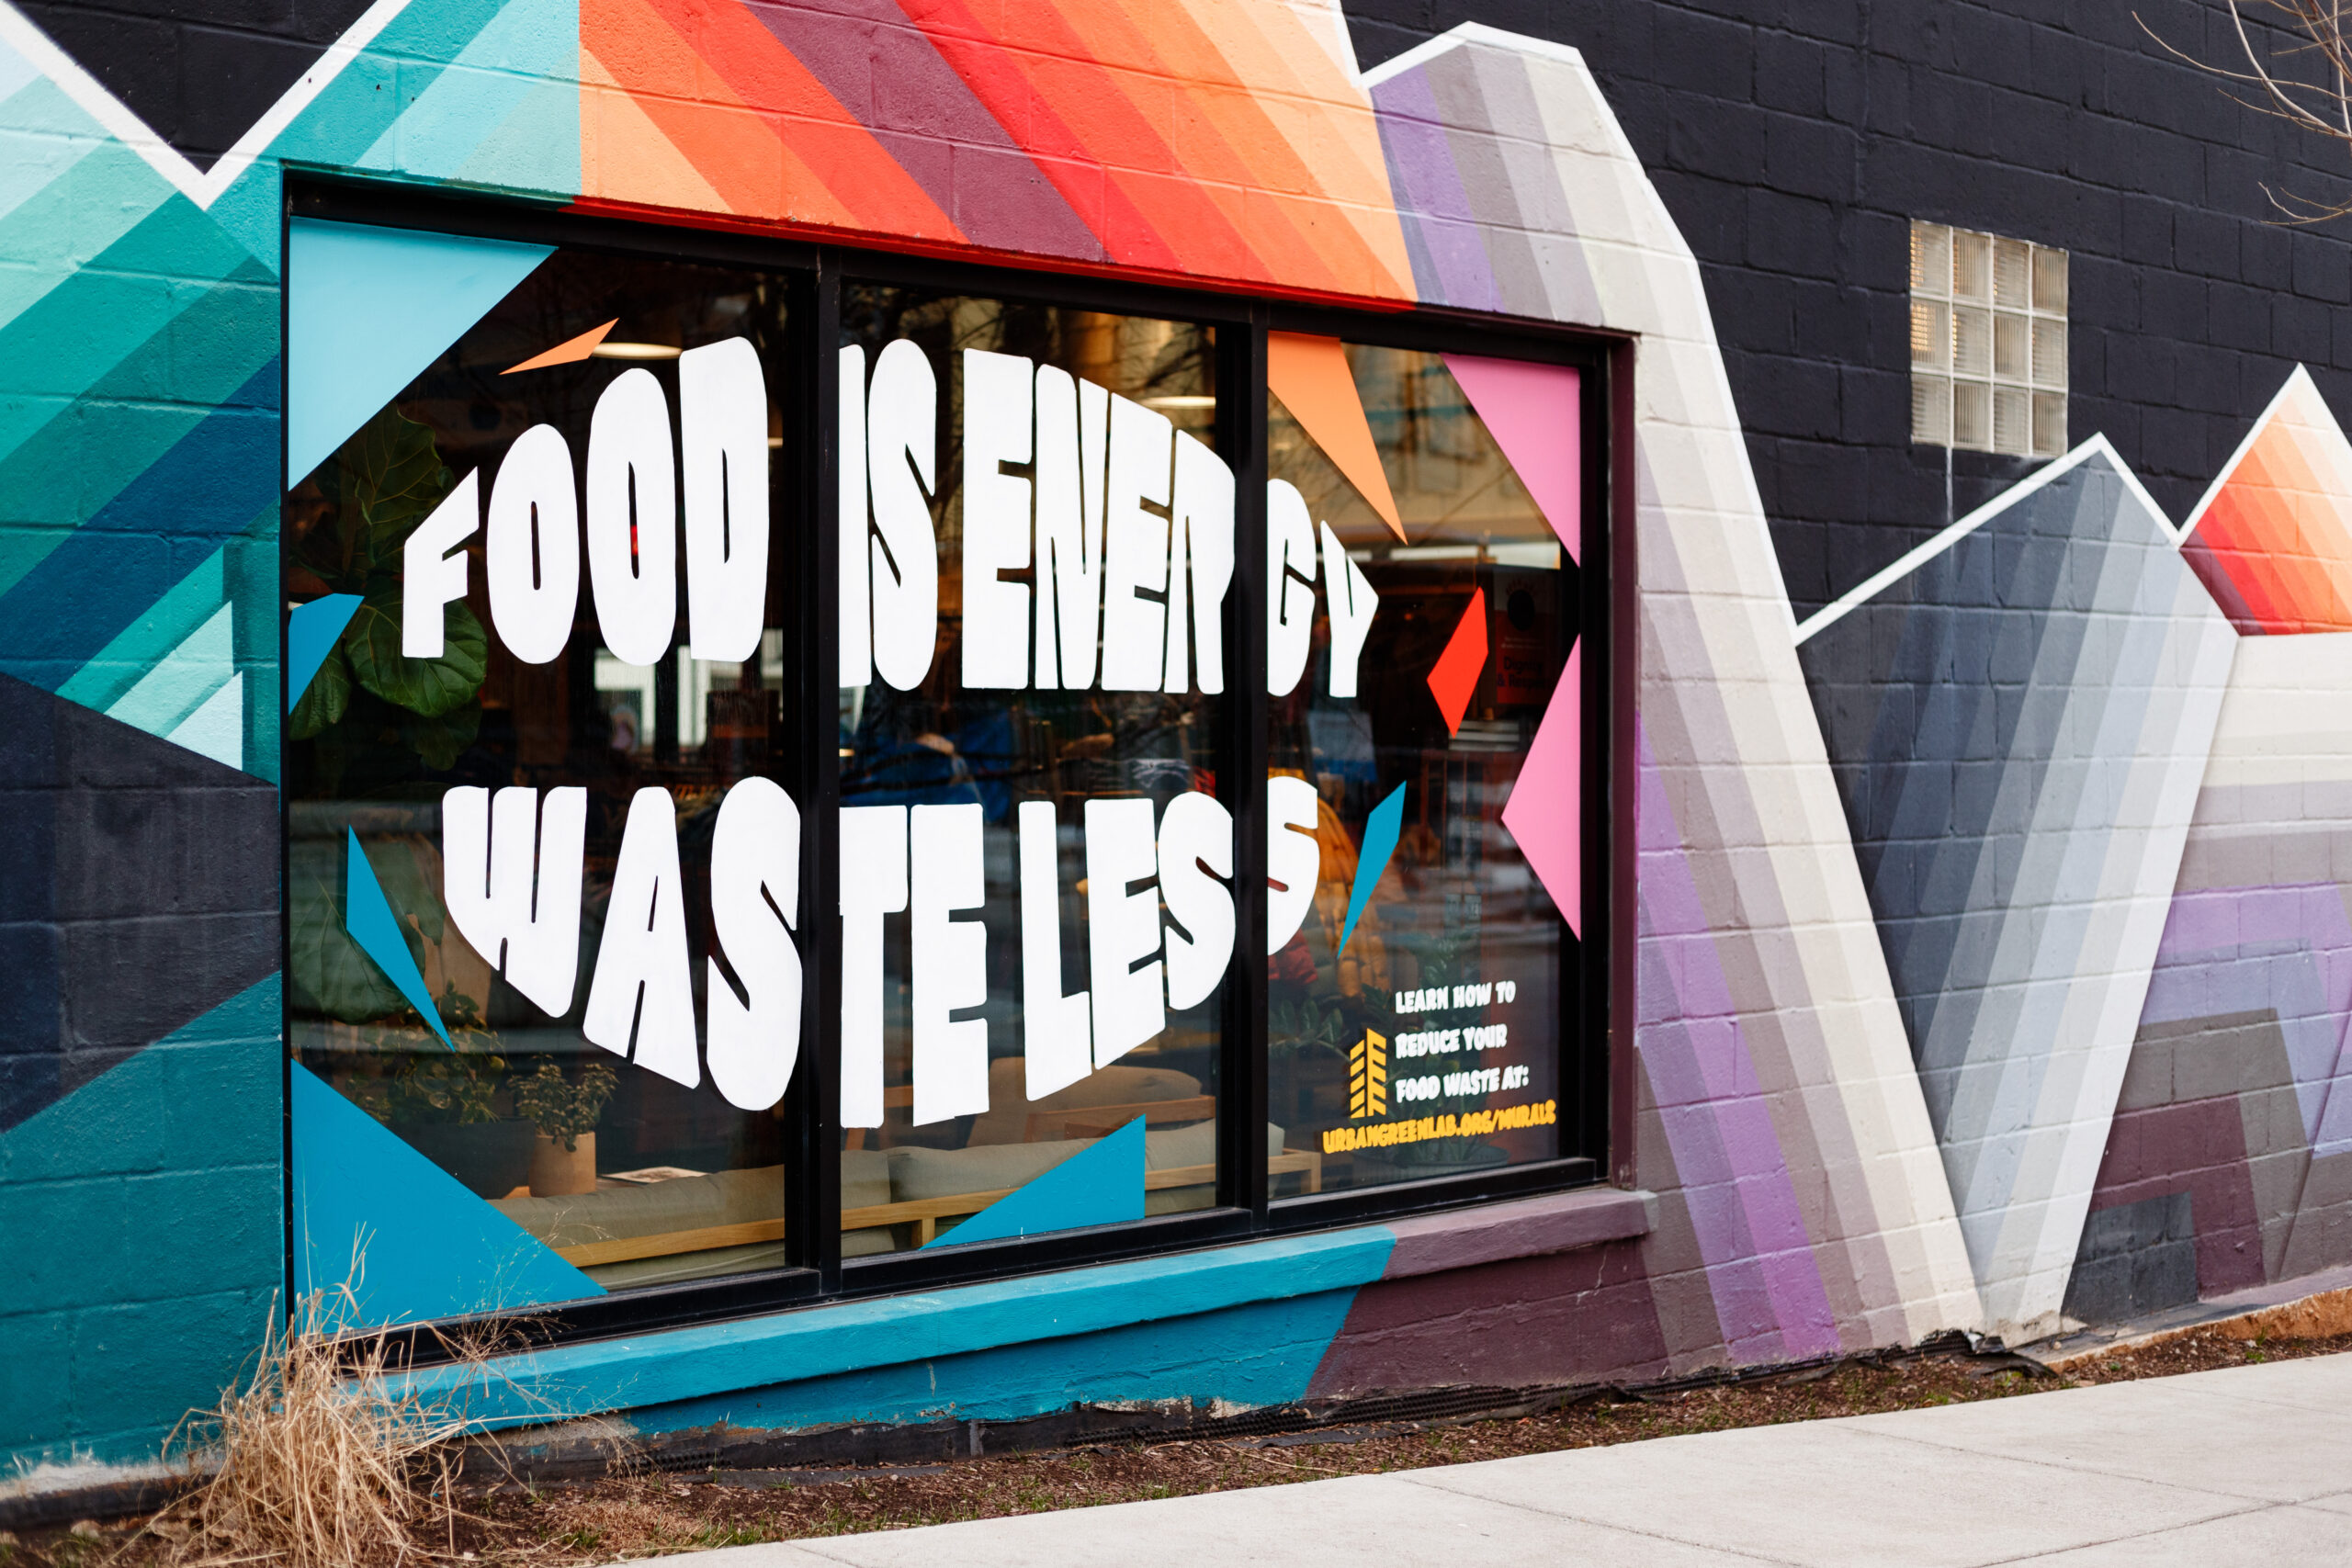 Mural that says "Food is energy. Waste less." painted on a store window